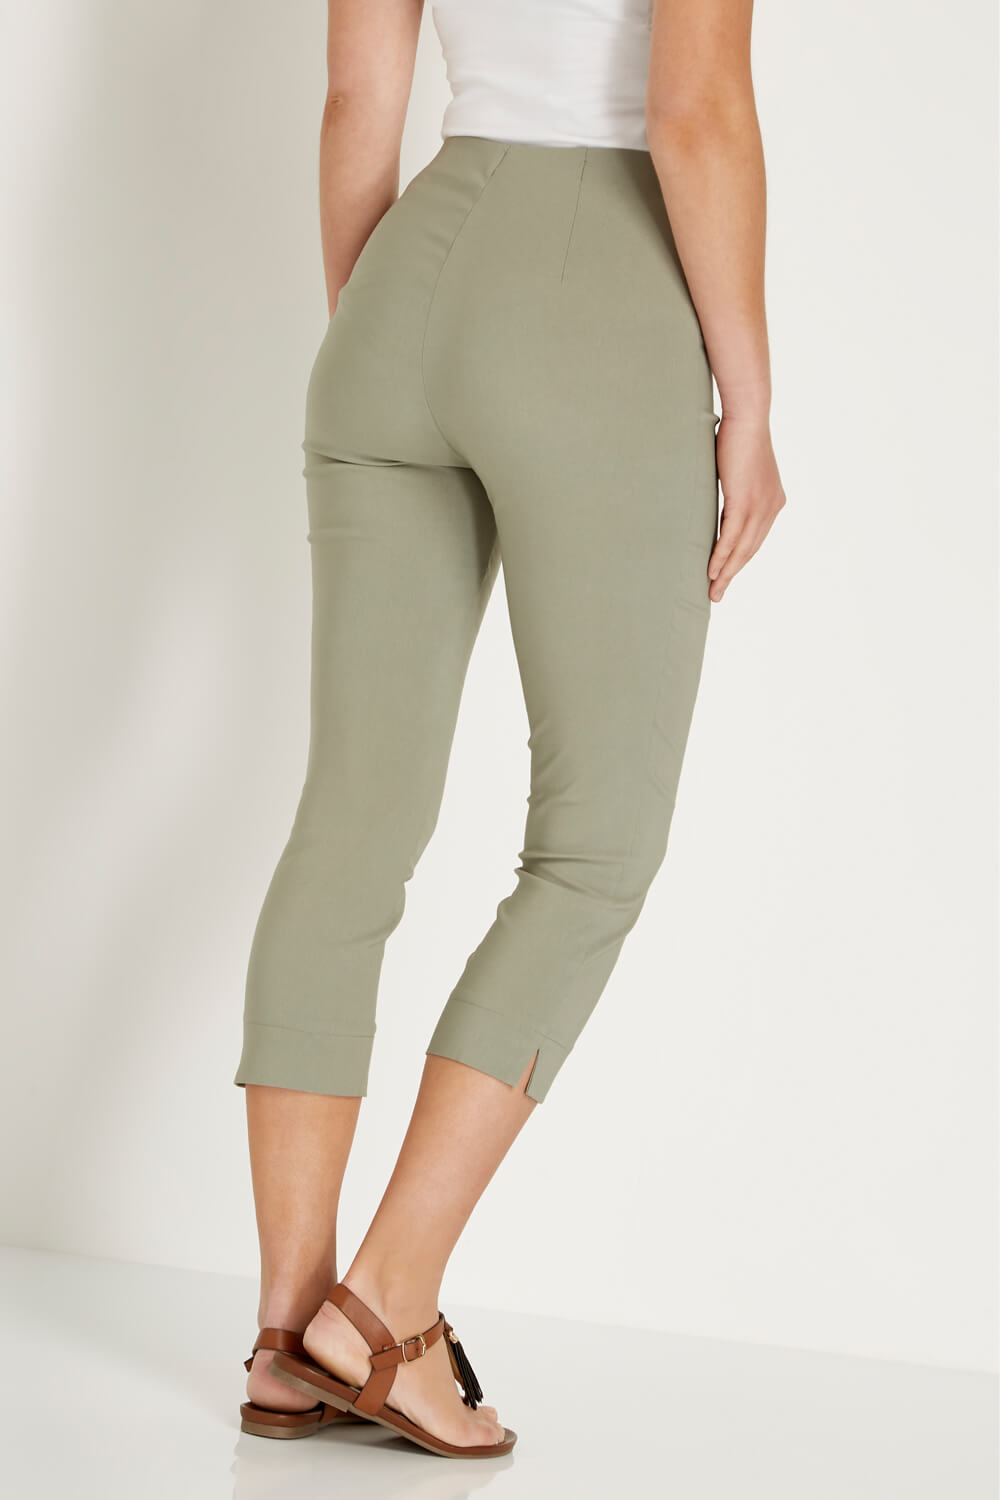 KHAKI Cropped Stretch Trouser, Image 2 of 5